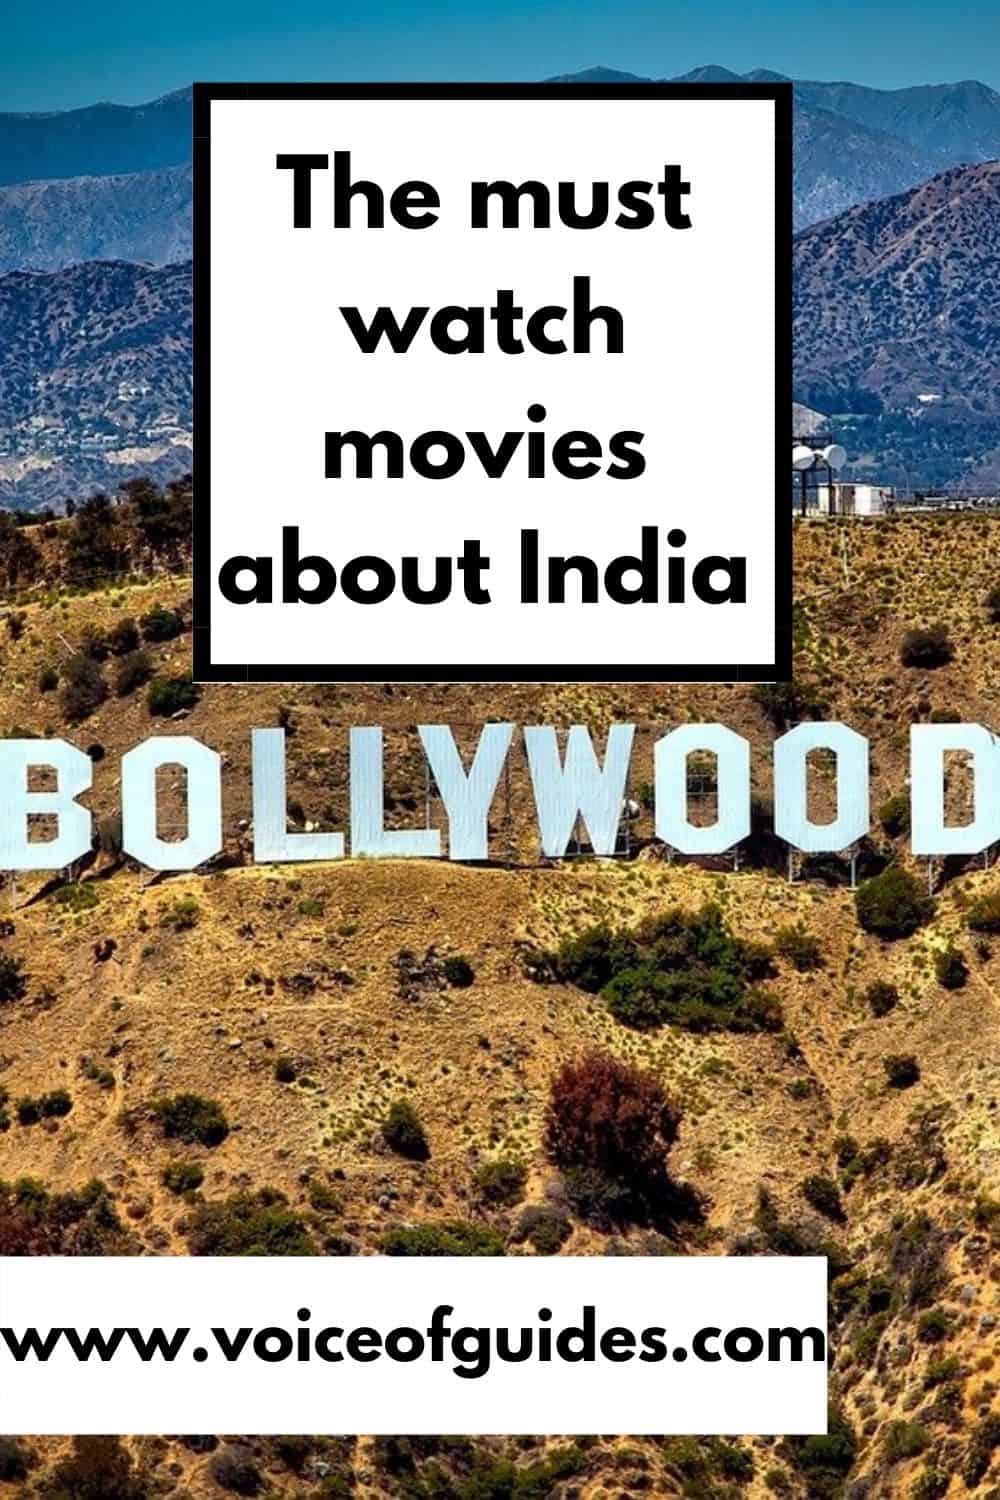 Do you want to learn more about India through movies? This list of the best Bollywood, Hollywood and British movies about India give you a deep understanding of Indian history and culture #best movies about India #Bollywood movies #Hollywood movies about India